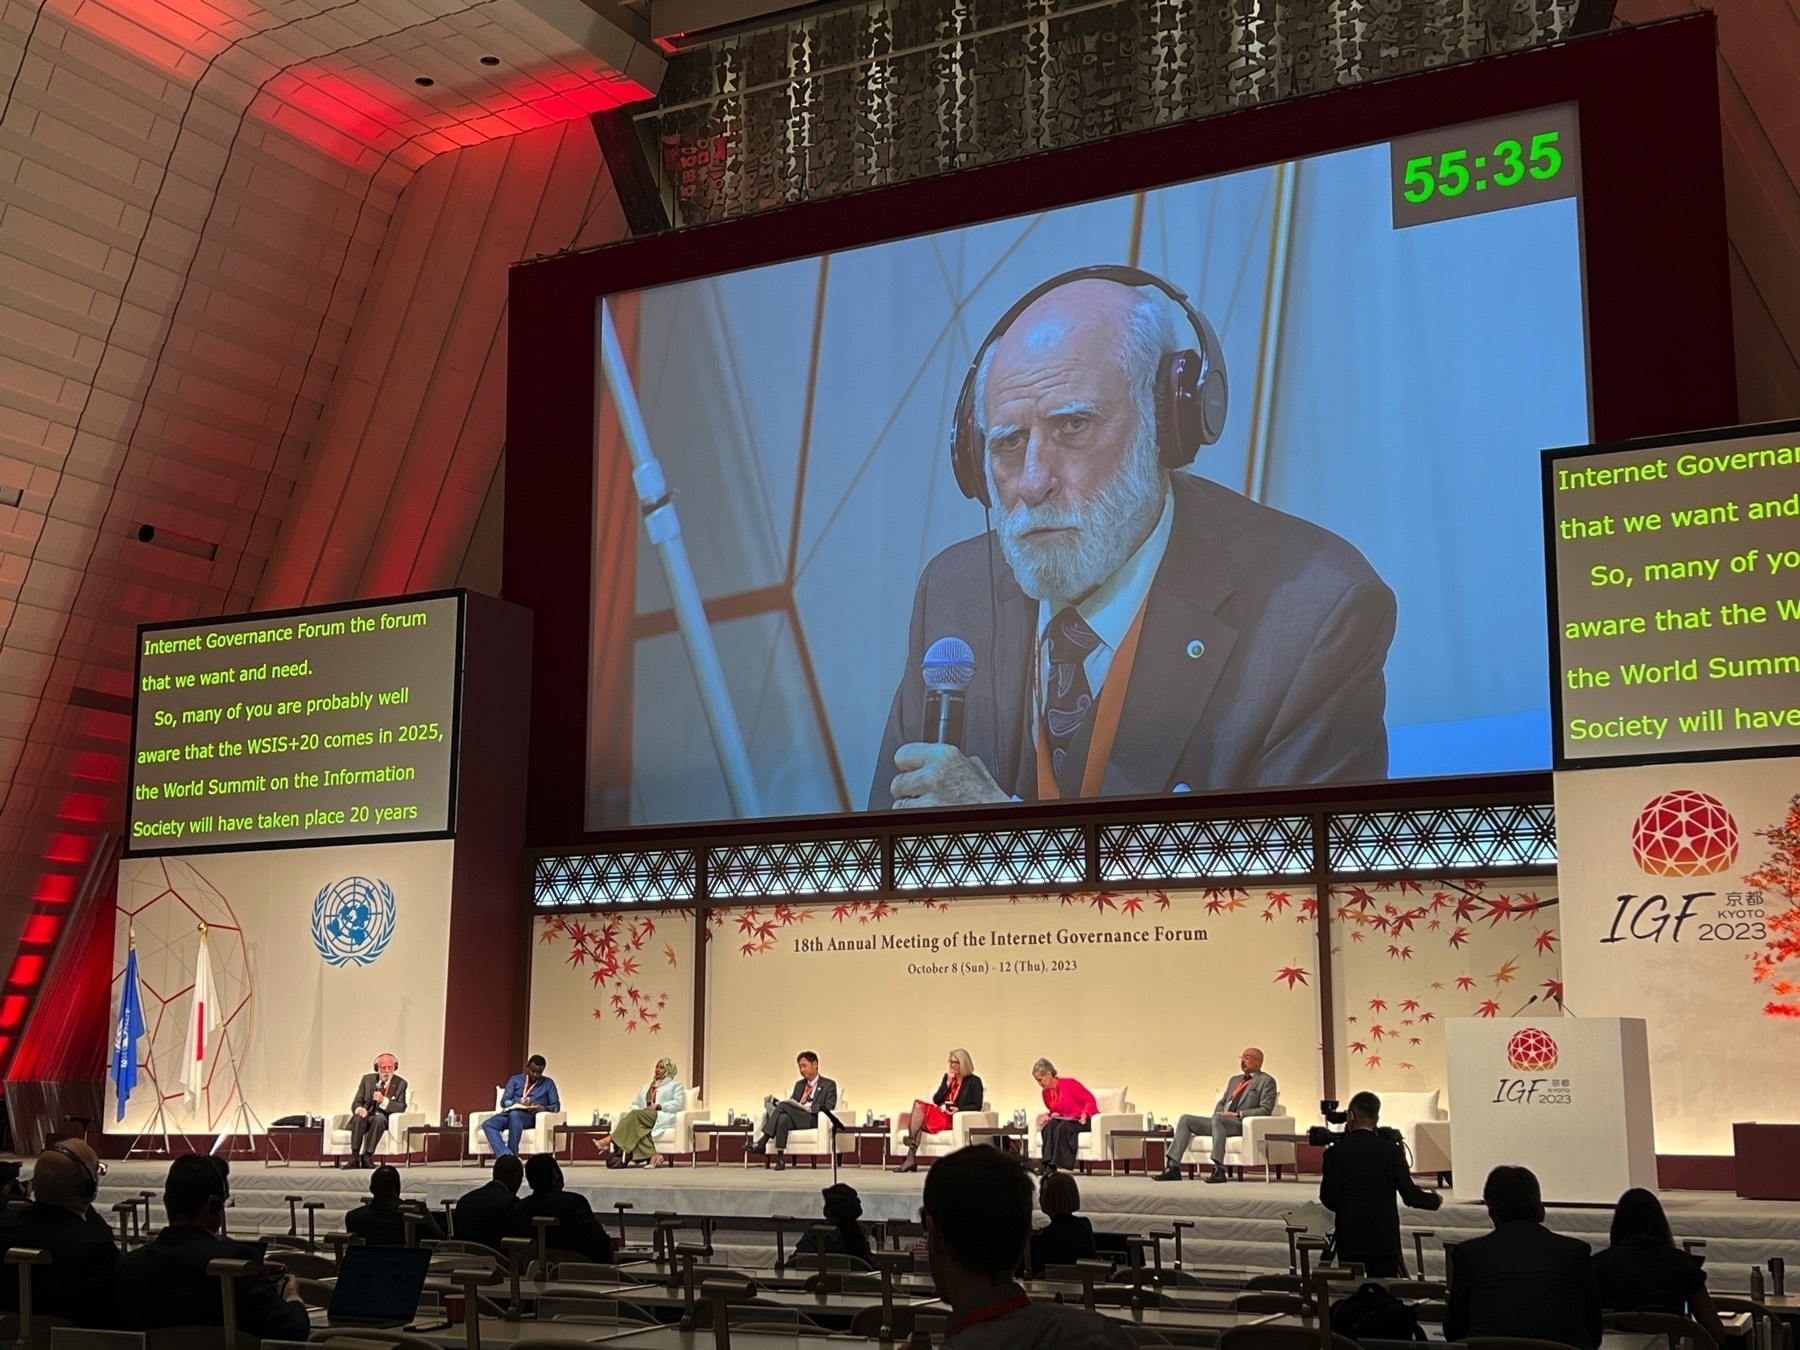 A stage with 8 speakers. A large screen above displays the face of Vint Cerf who is speaking